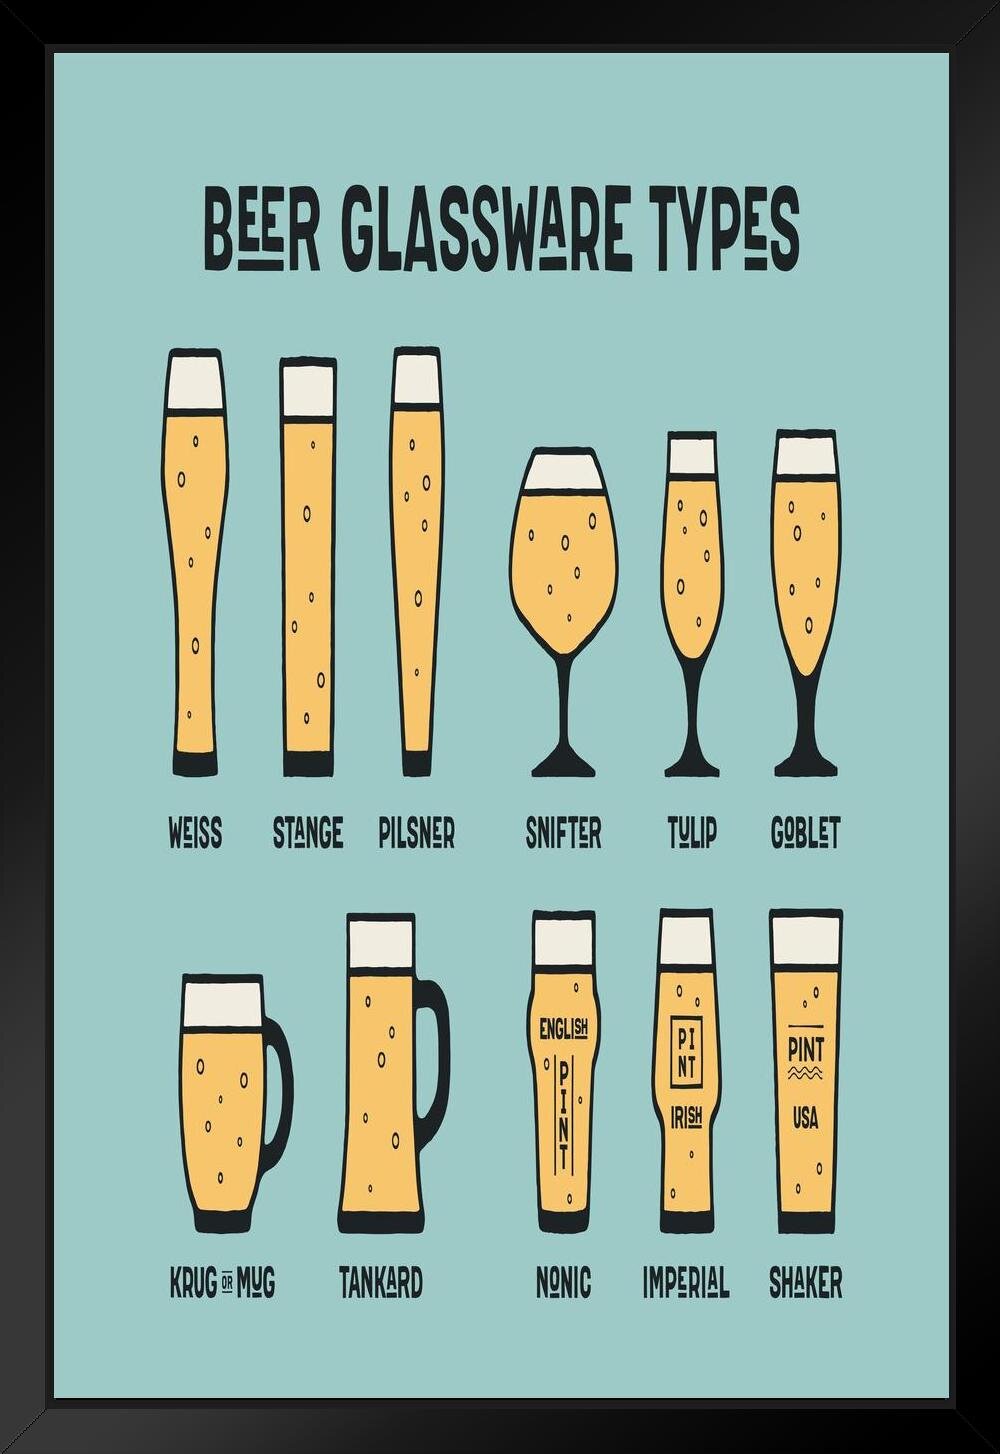 Types of Beer Glasses and Styles of Beer Reference Guide Chart